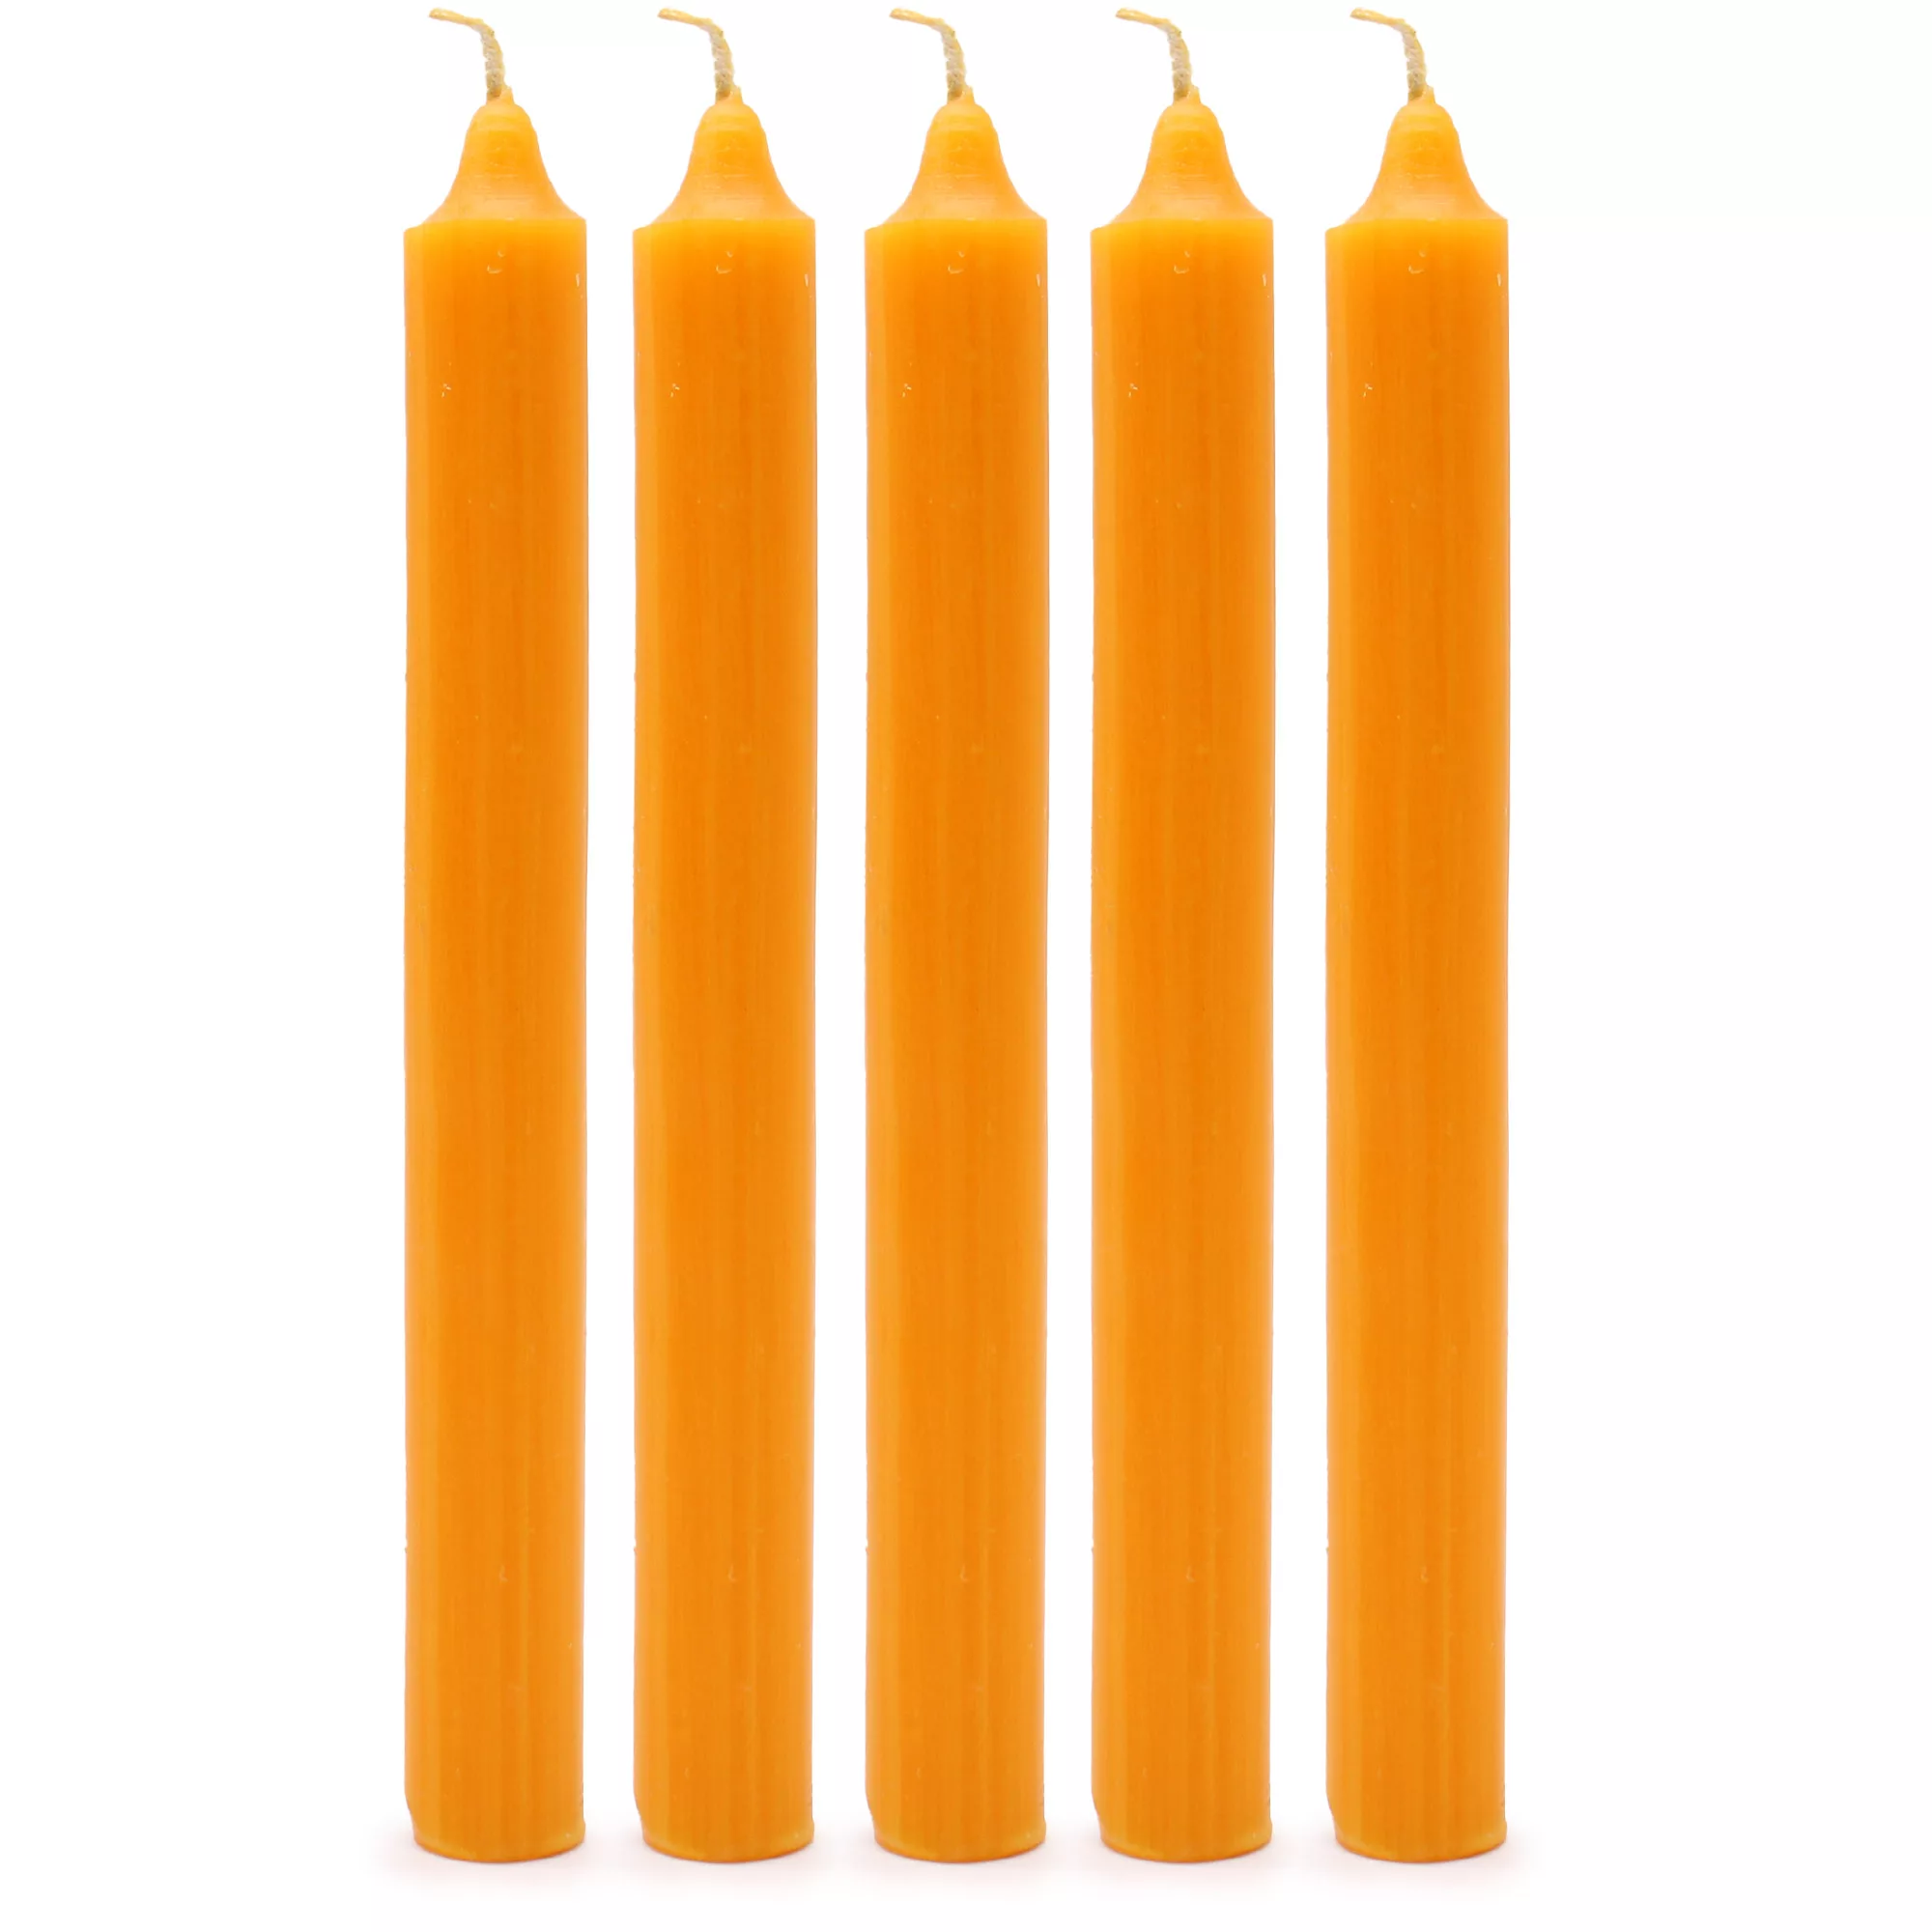 Solid Colour Dinner Candles – Rustic Mango – Pack of 5